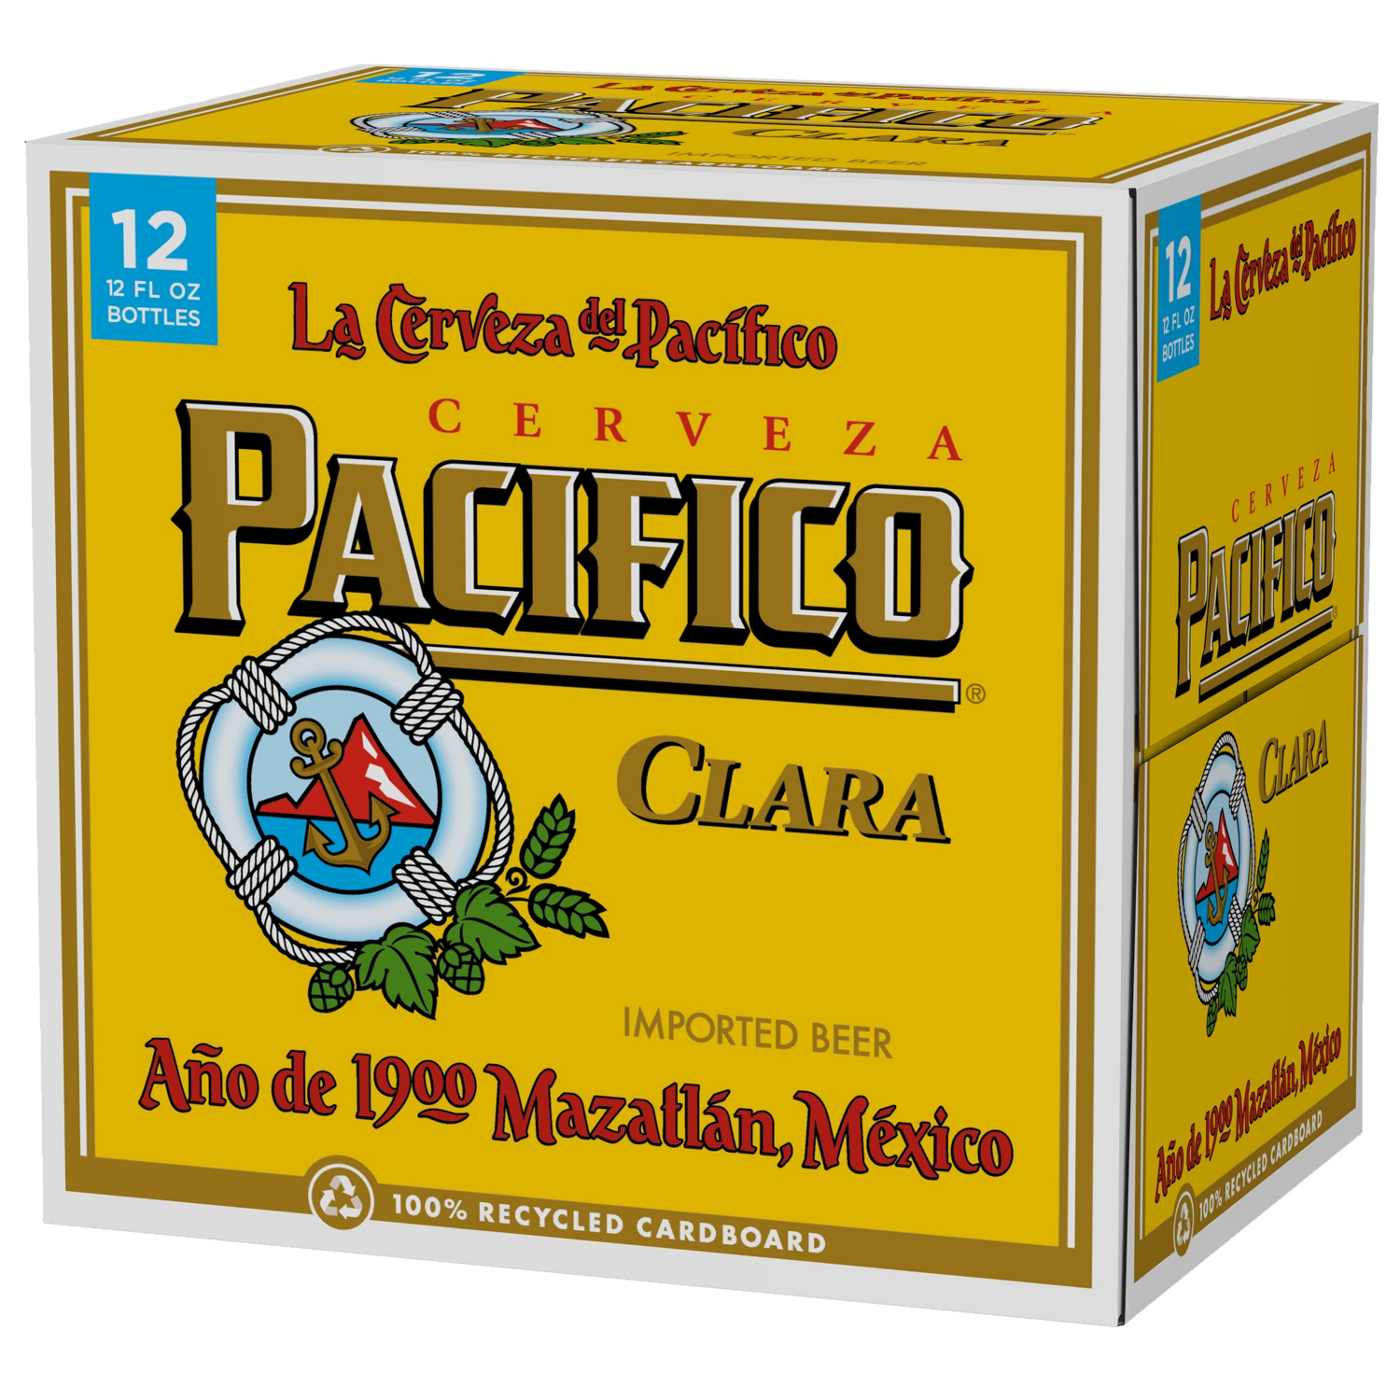 Pacifico Clara Mexican Lager Import Beer 12 oz Bottles, 12 pk; image 5 of 10